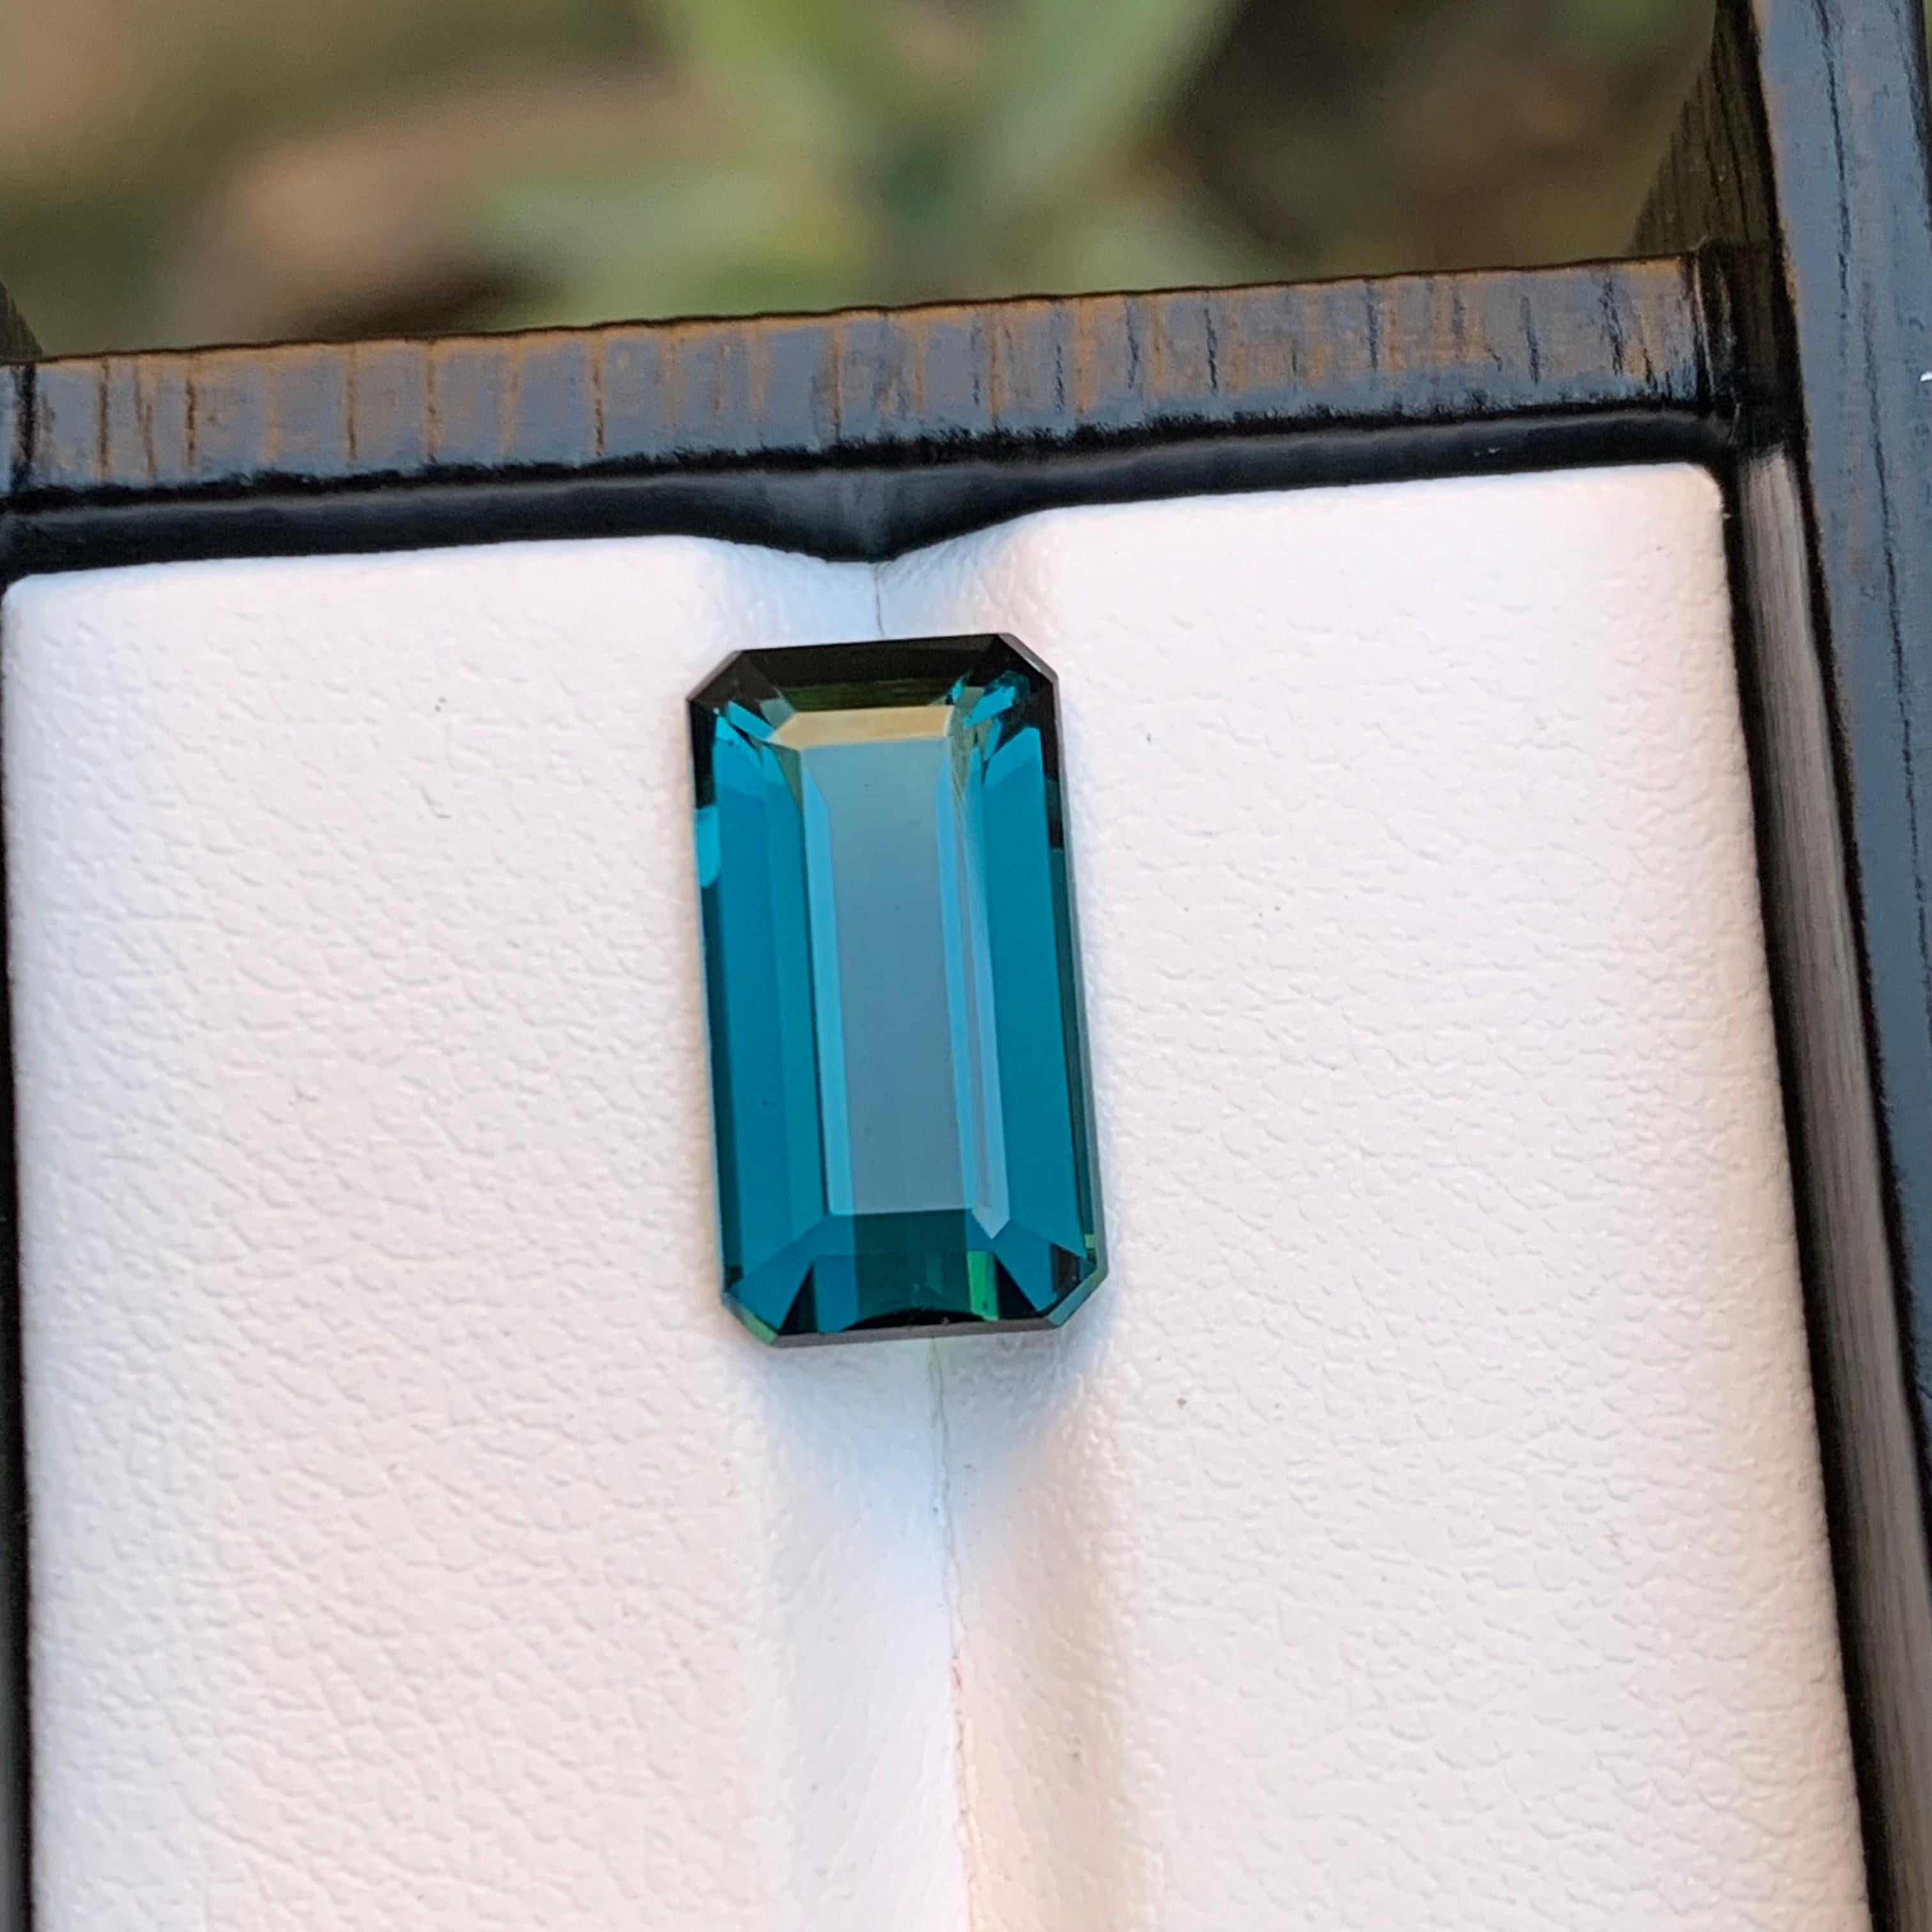 Rare Indicolite Blue Natural Tourmaline Gemstone, 5.20 Ct Emerald Cut for a Ring For Sale 2